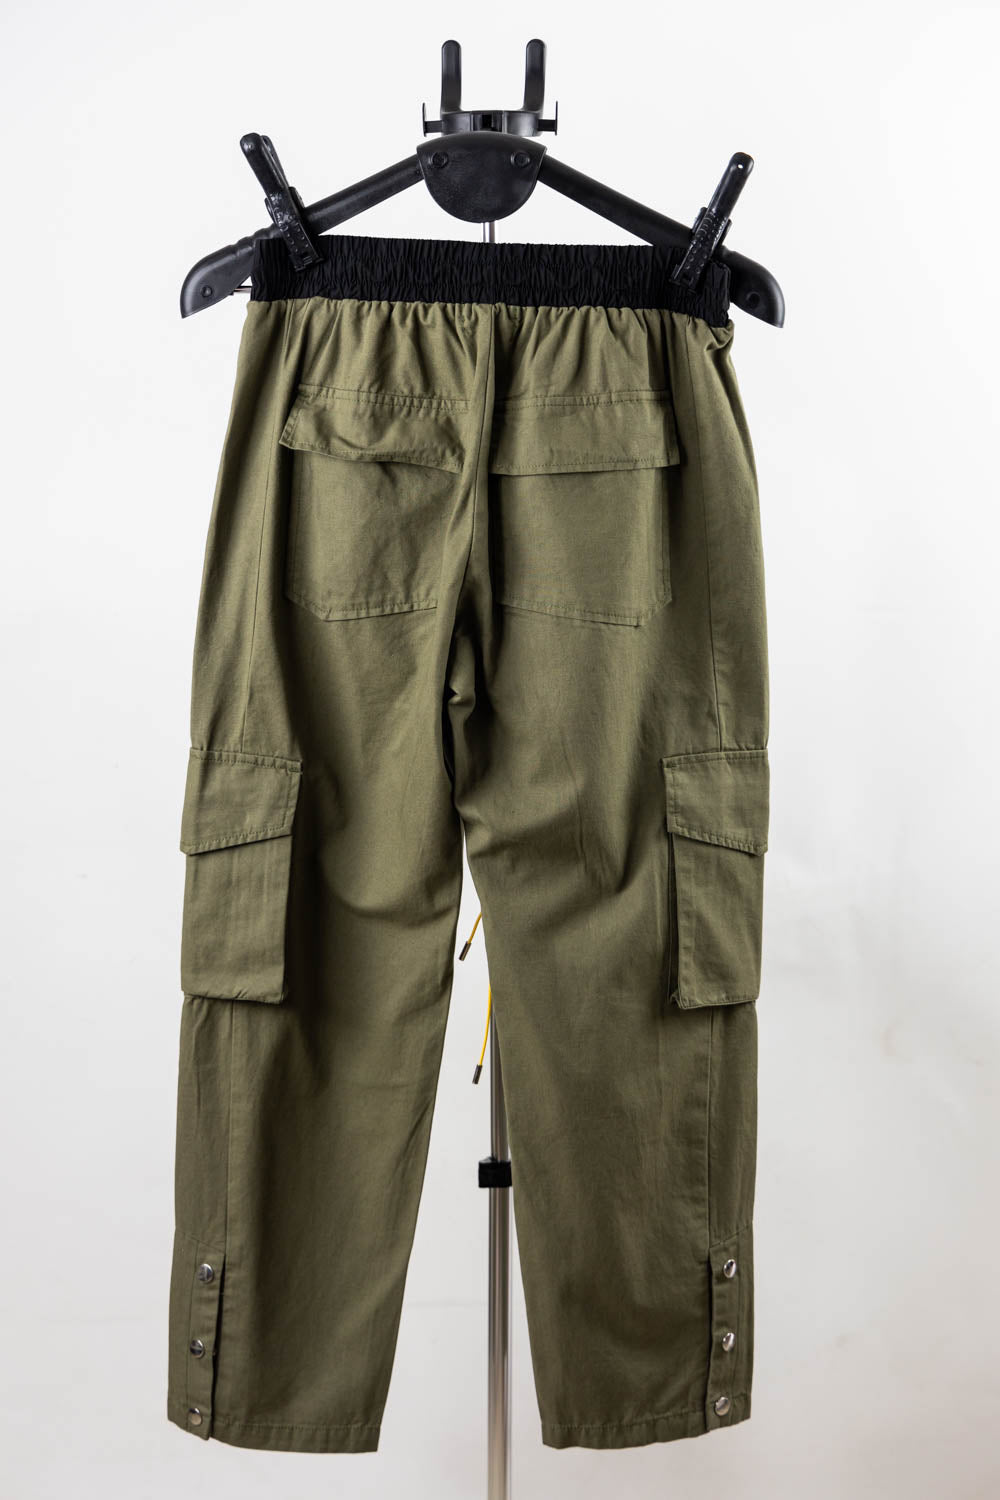 SNAP CARGO PANTS Olive